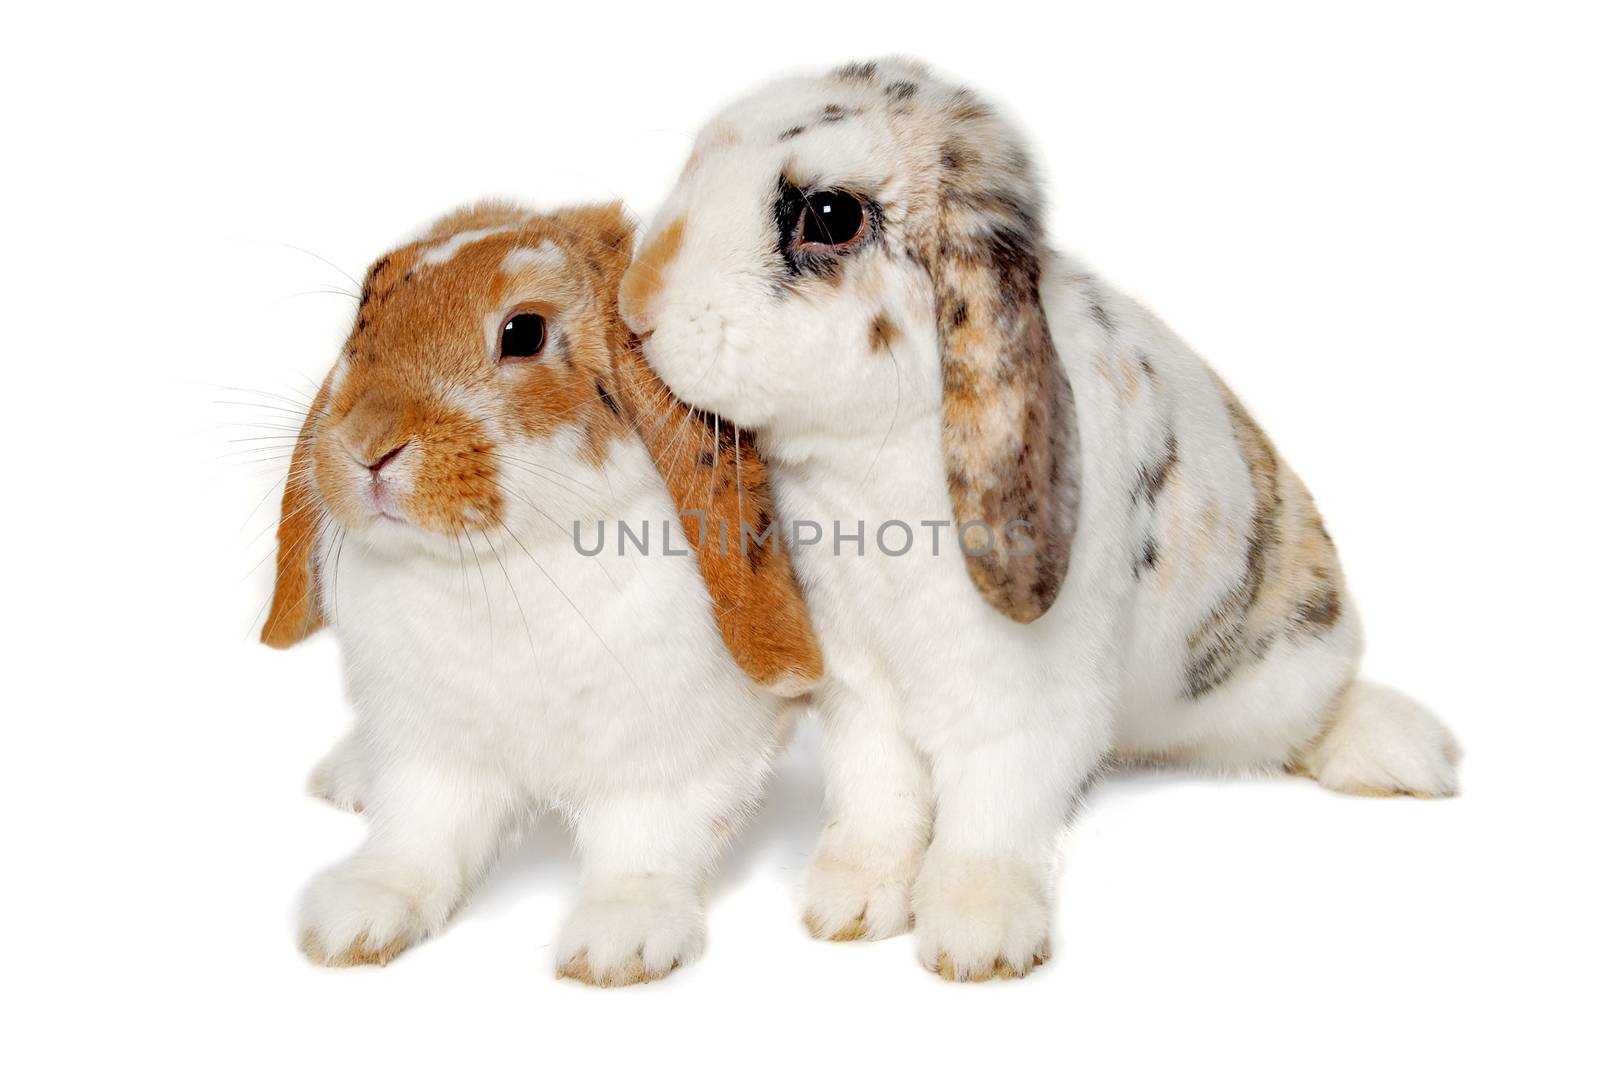 Two rabbits isolated on a white background by cfoto